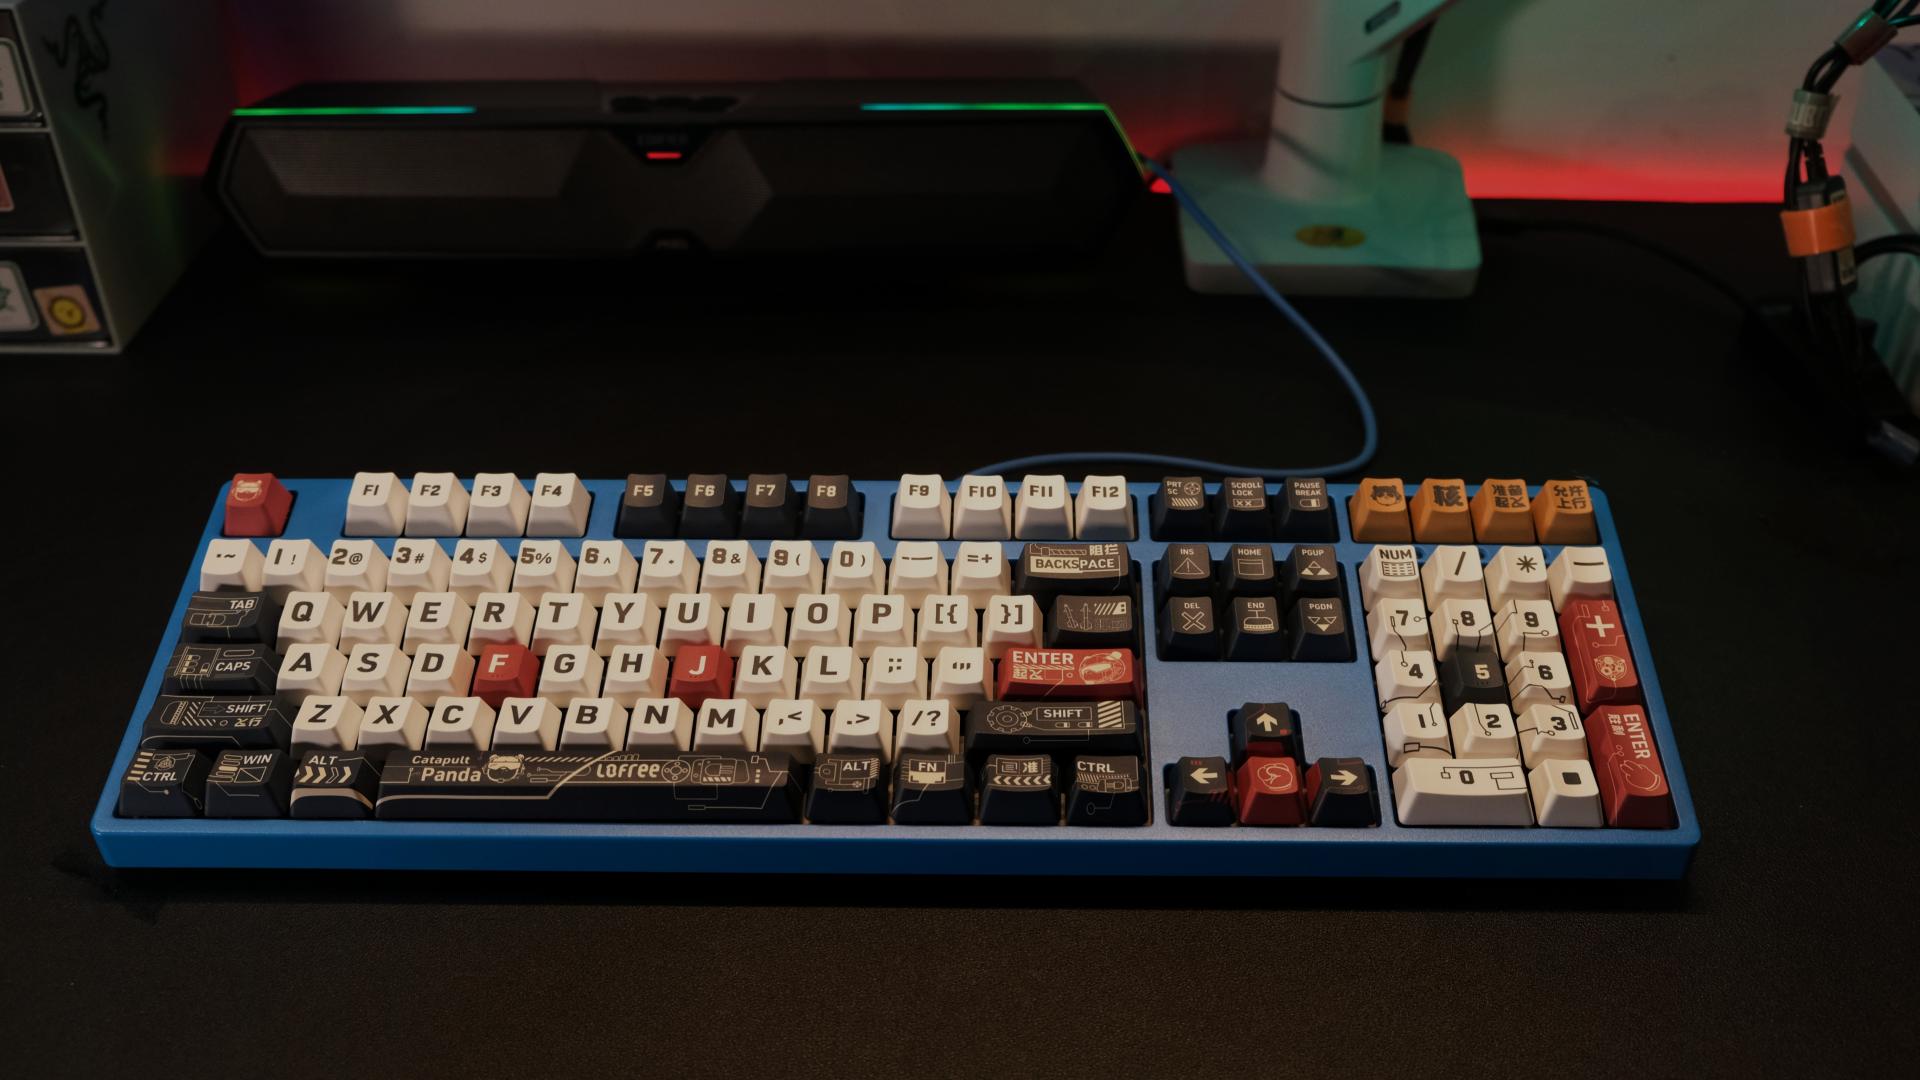 How about lofree Lofei Latest Lofree keycap experience report